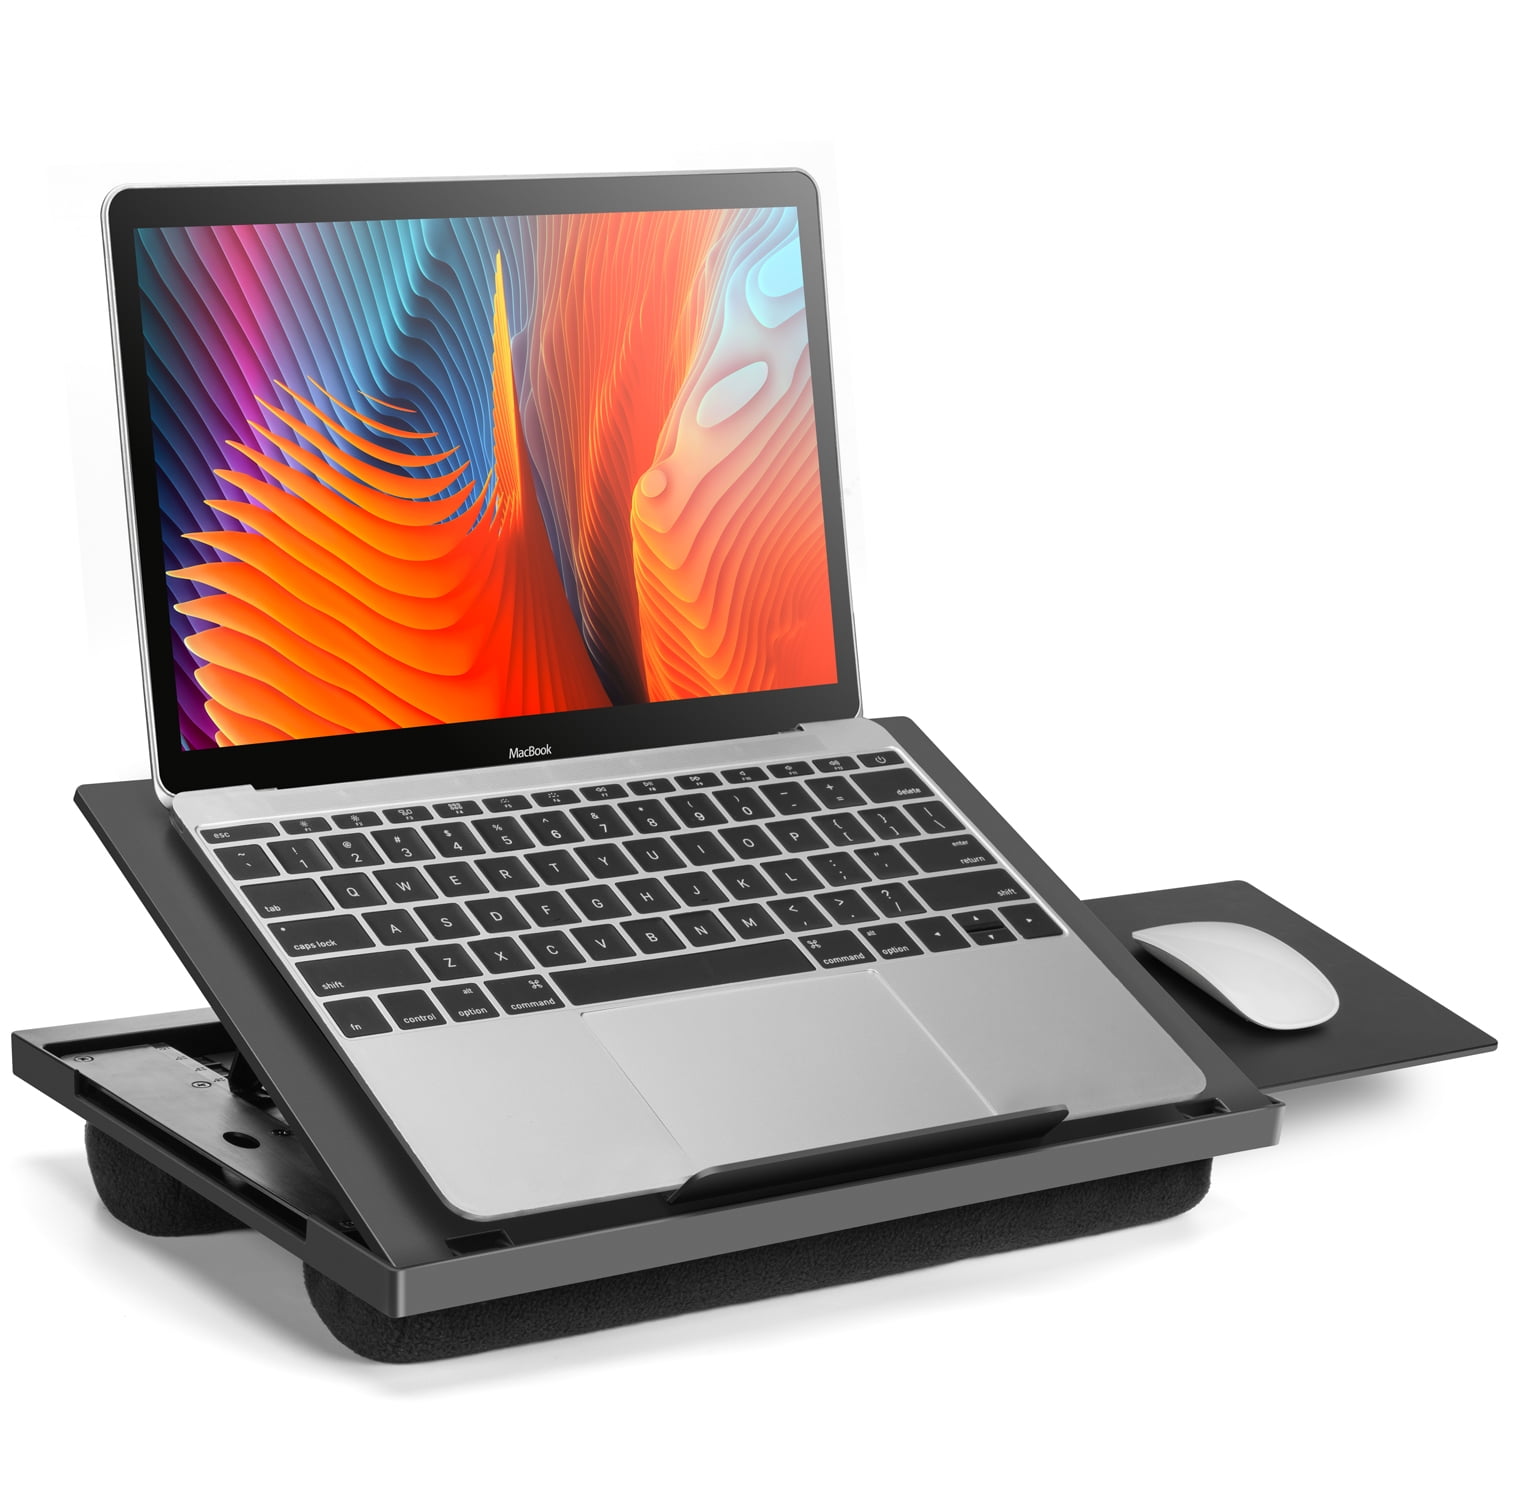 1 HUANUO Portable Laptop Desk Stand Foldable Ventilated for Notebook 